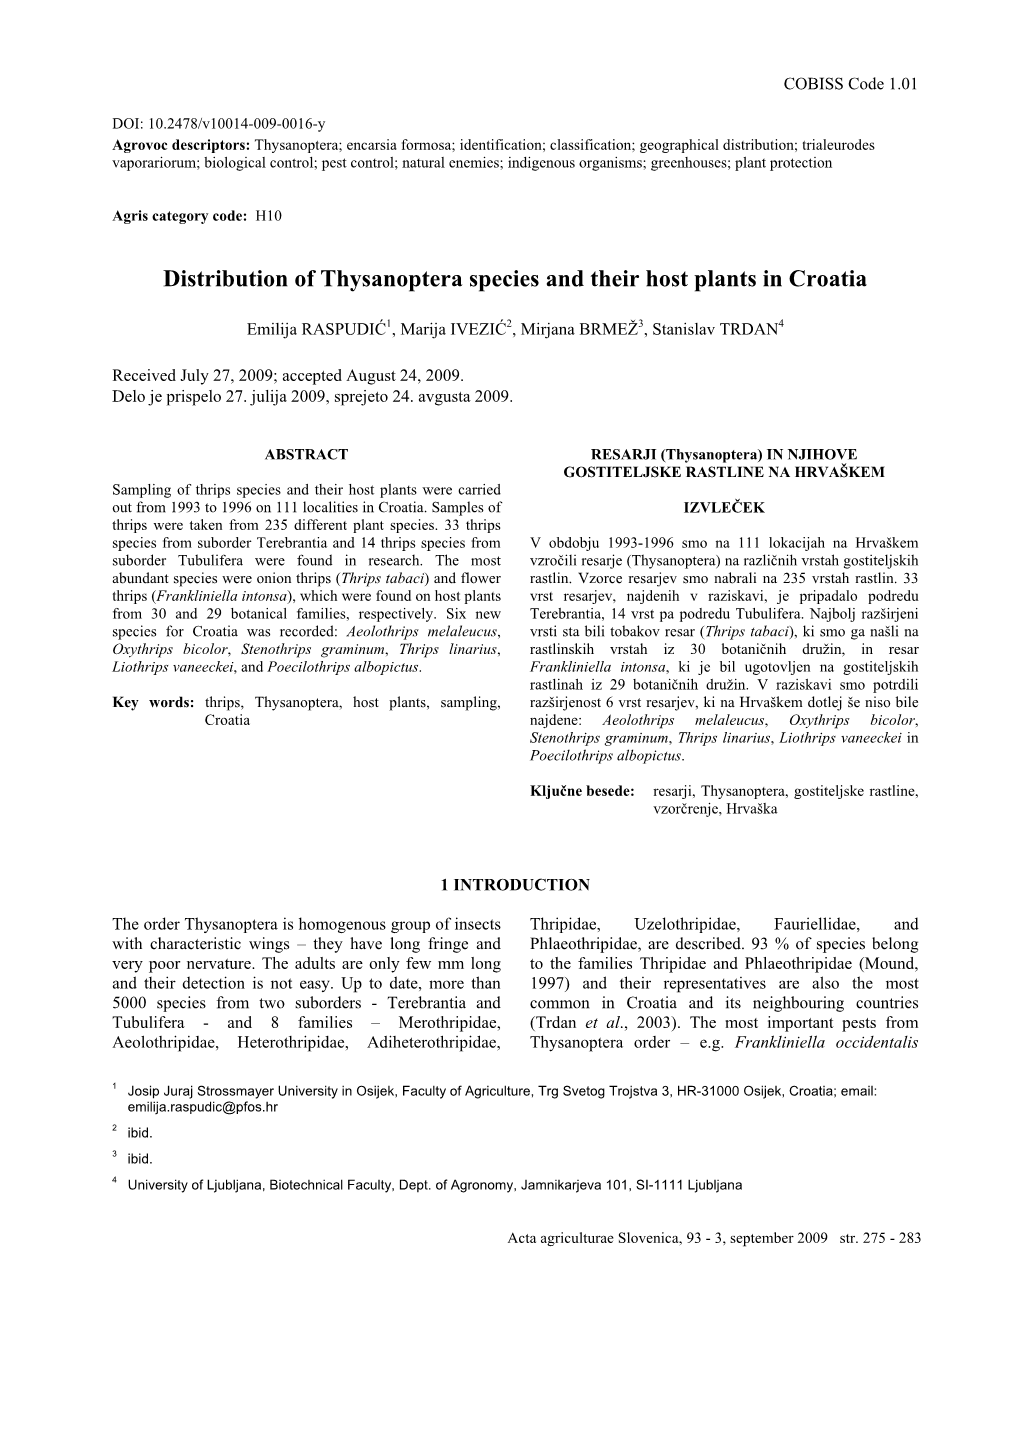 Distribution of Thysanoptera Species and Their Host Plants in Croatia